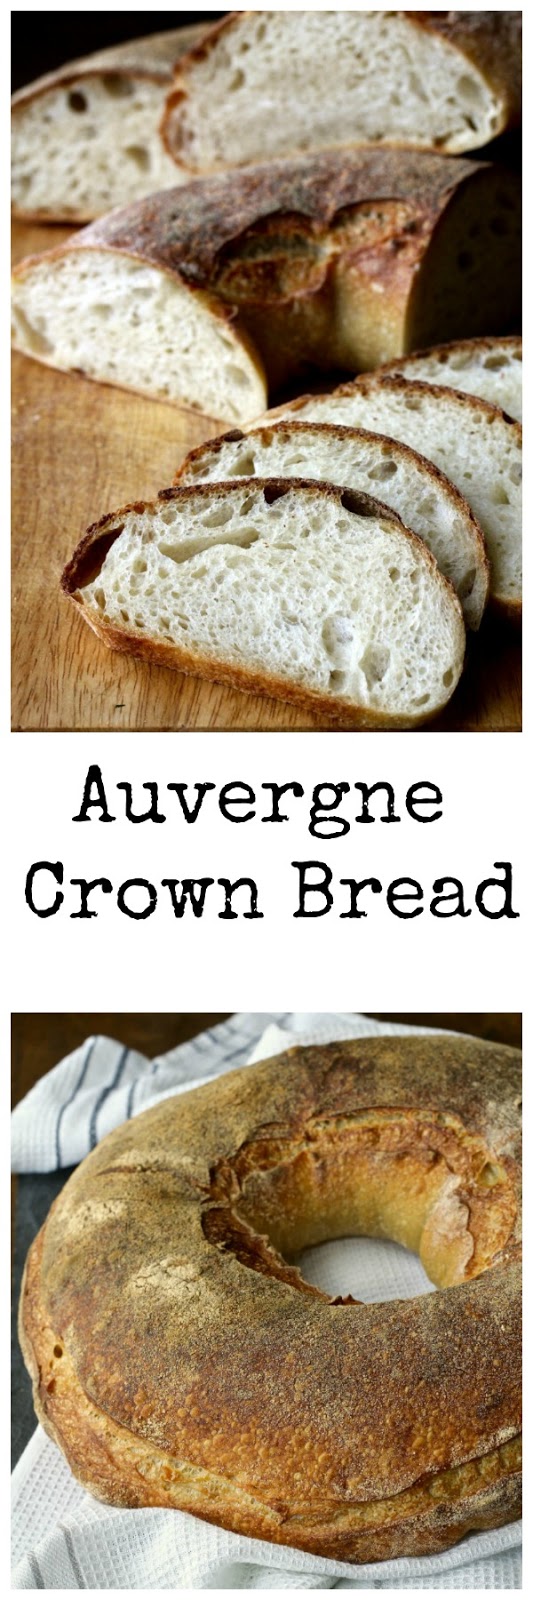 The Auvergne Crown is a classic French shape. You can find these couronnes in boulangeries throughout most of France. The loaves are deeply browned and crusty, and the crumb is exceptionally flavorful with lots of uneven holes.